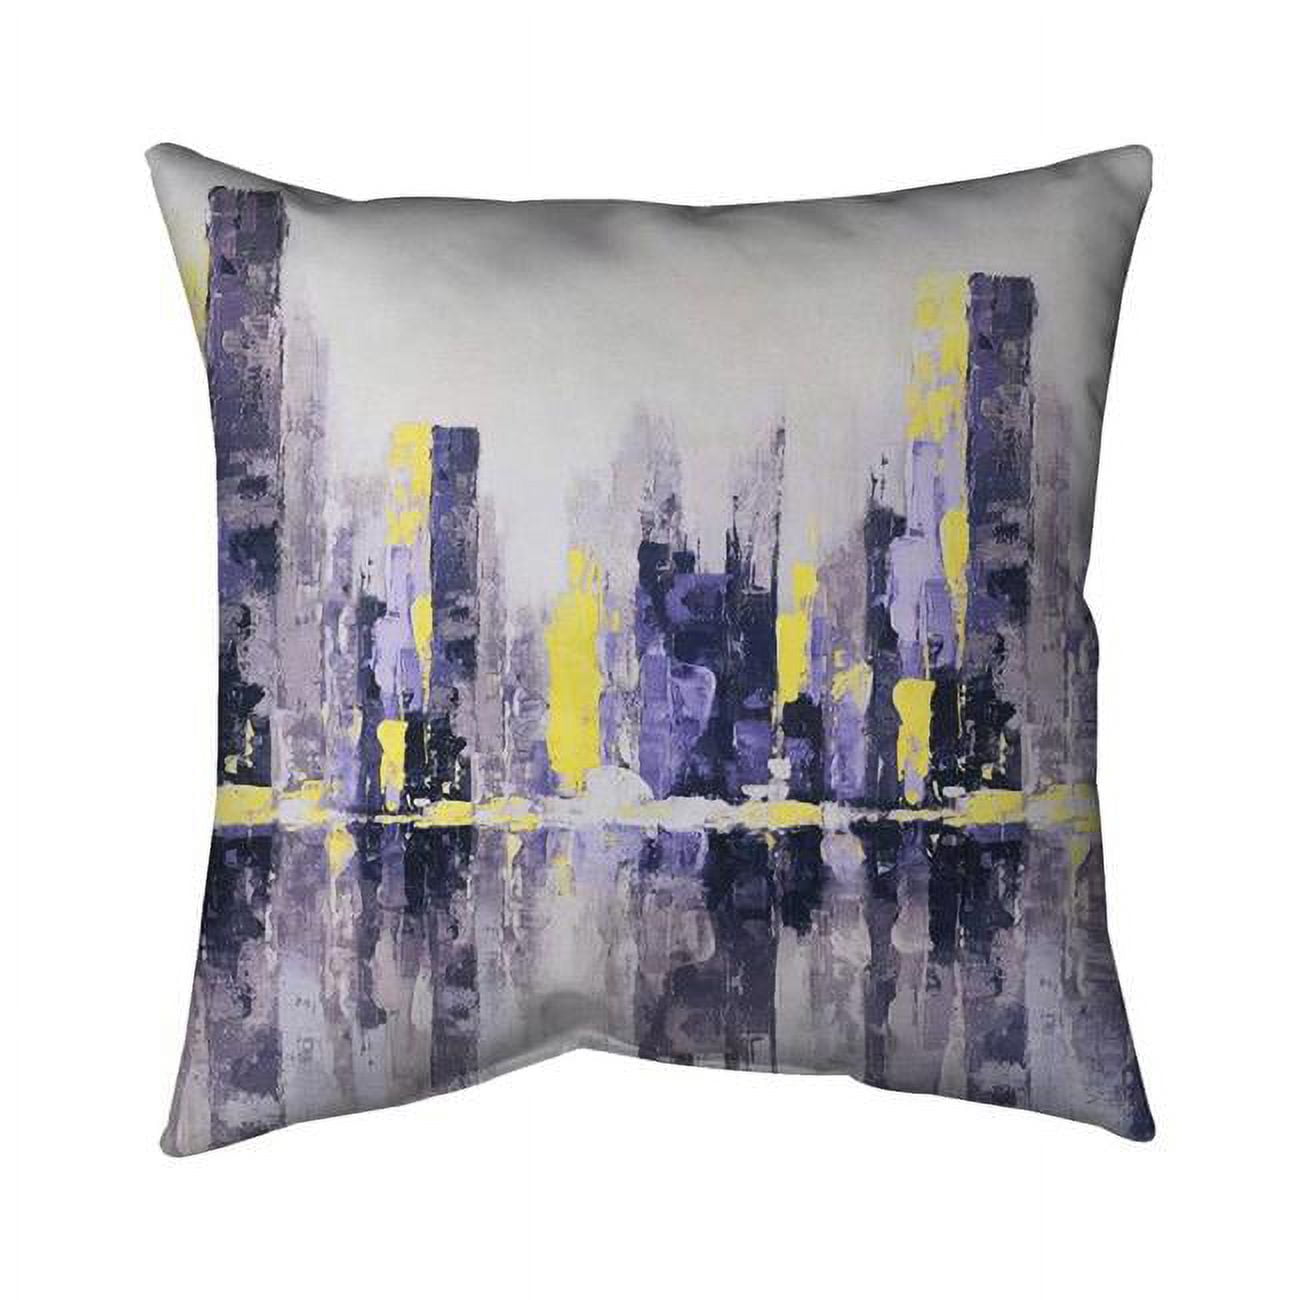 Begin Home Decor 5542-1616-CI130 16 x 16 in. Abstract Purple City-Double Sided Print Outdoor Pillow Cover